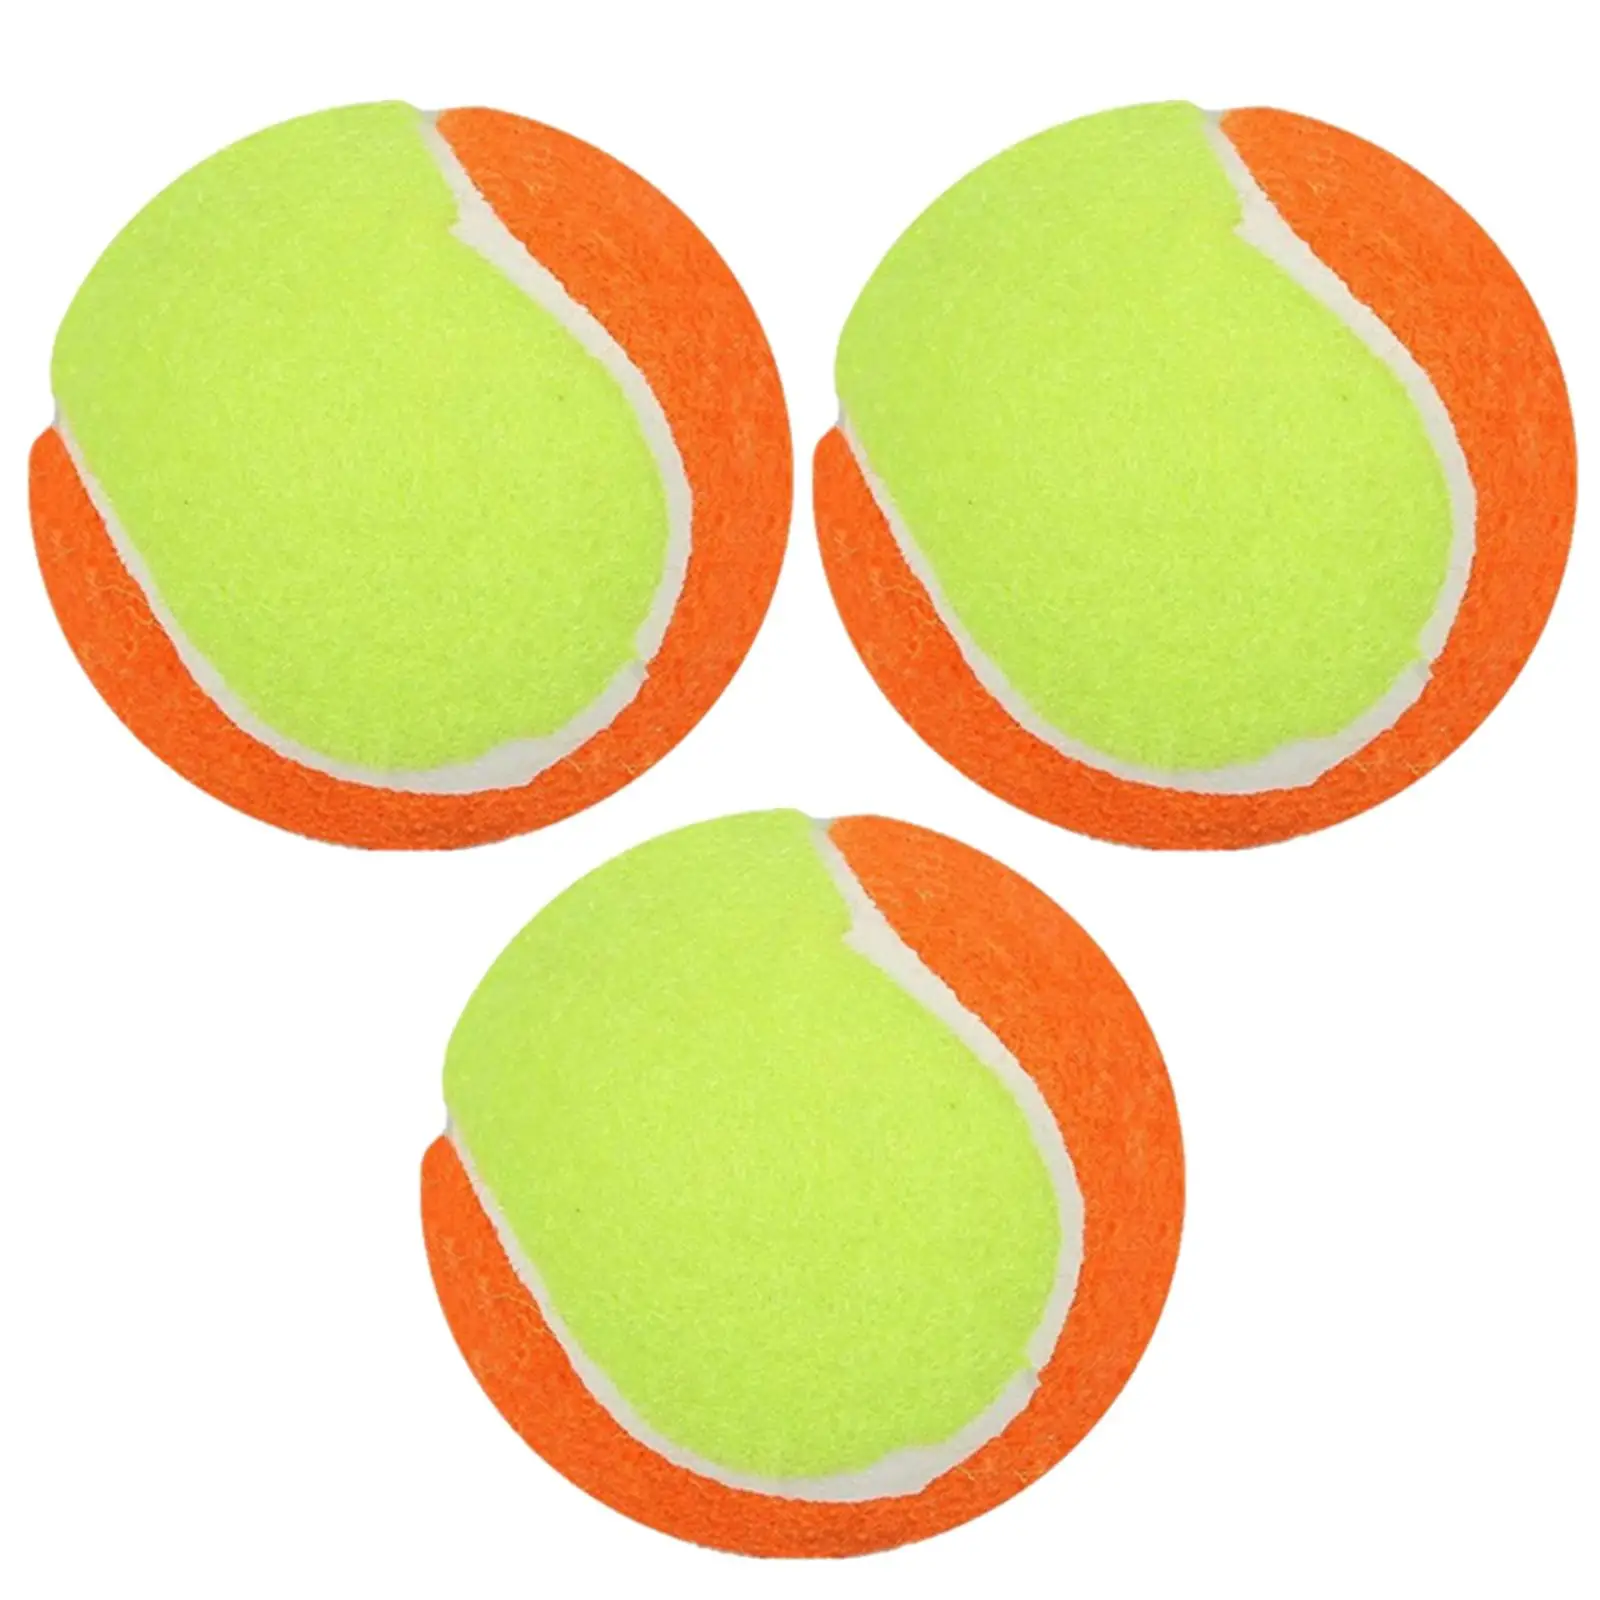 3x Tennis  Easily Track pinwheel Hit  Shots Dog  Toy Soft Tennis Balls for Kids  Ball for Outdoor Adult Dogs